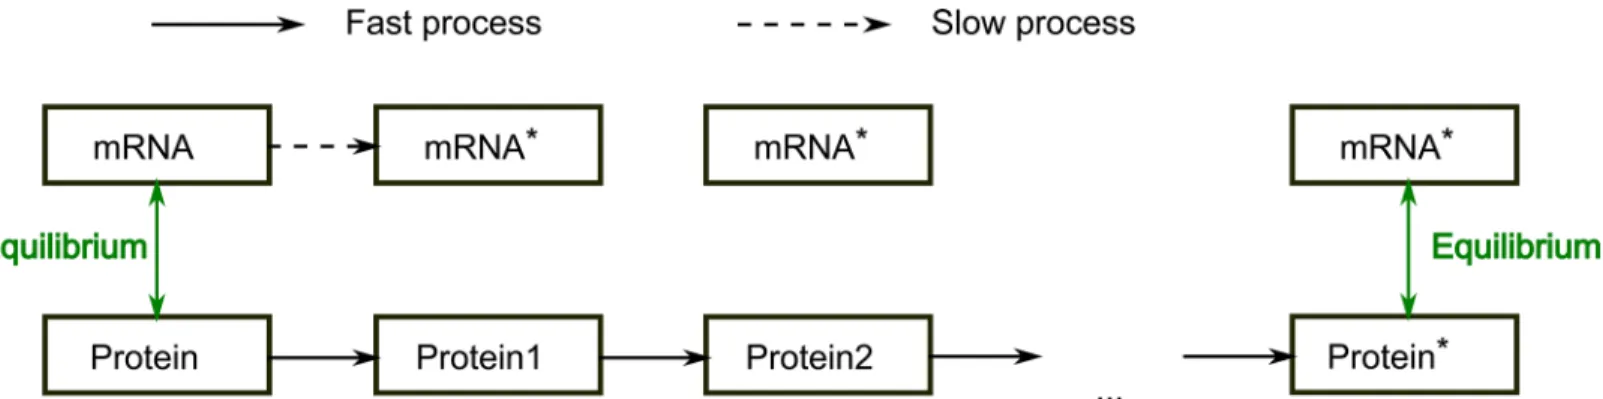 Fig 3. Graphical representation of the updating scheme. Every node consists of two variables, denoting the slow and fast processes, here dubbed mRNA and protein respectively